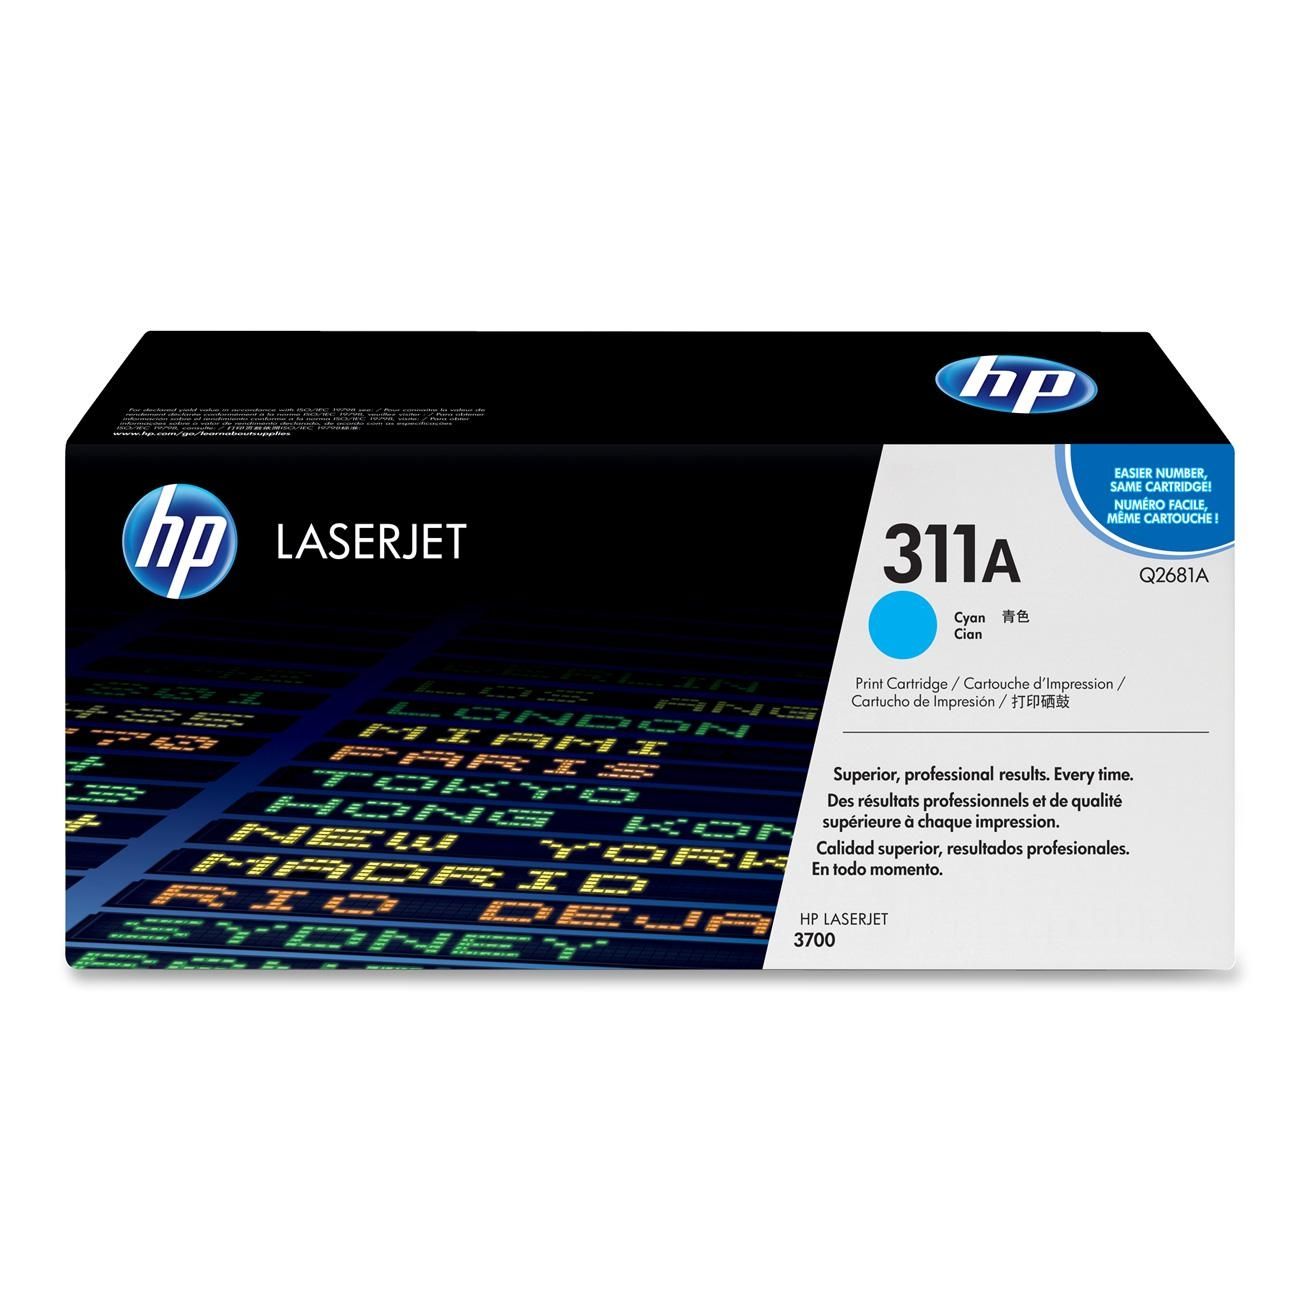 Related to HP 3700: Q2681A